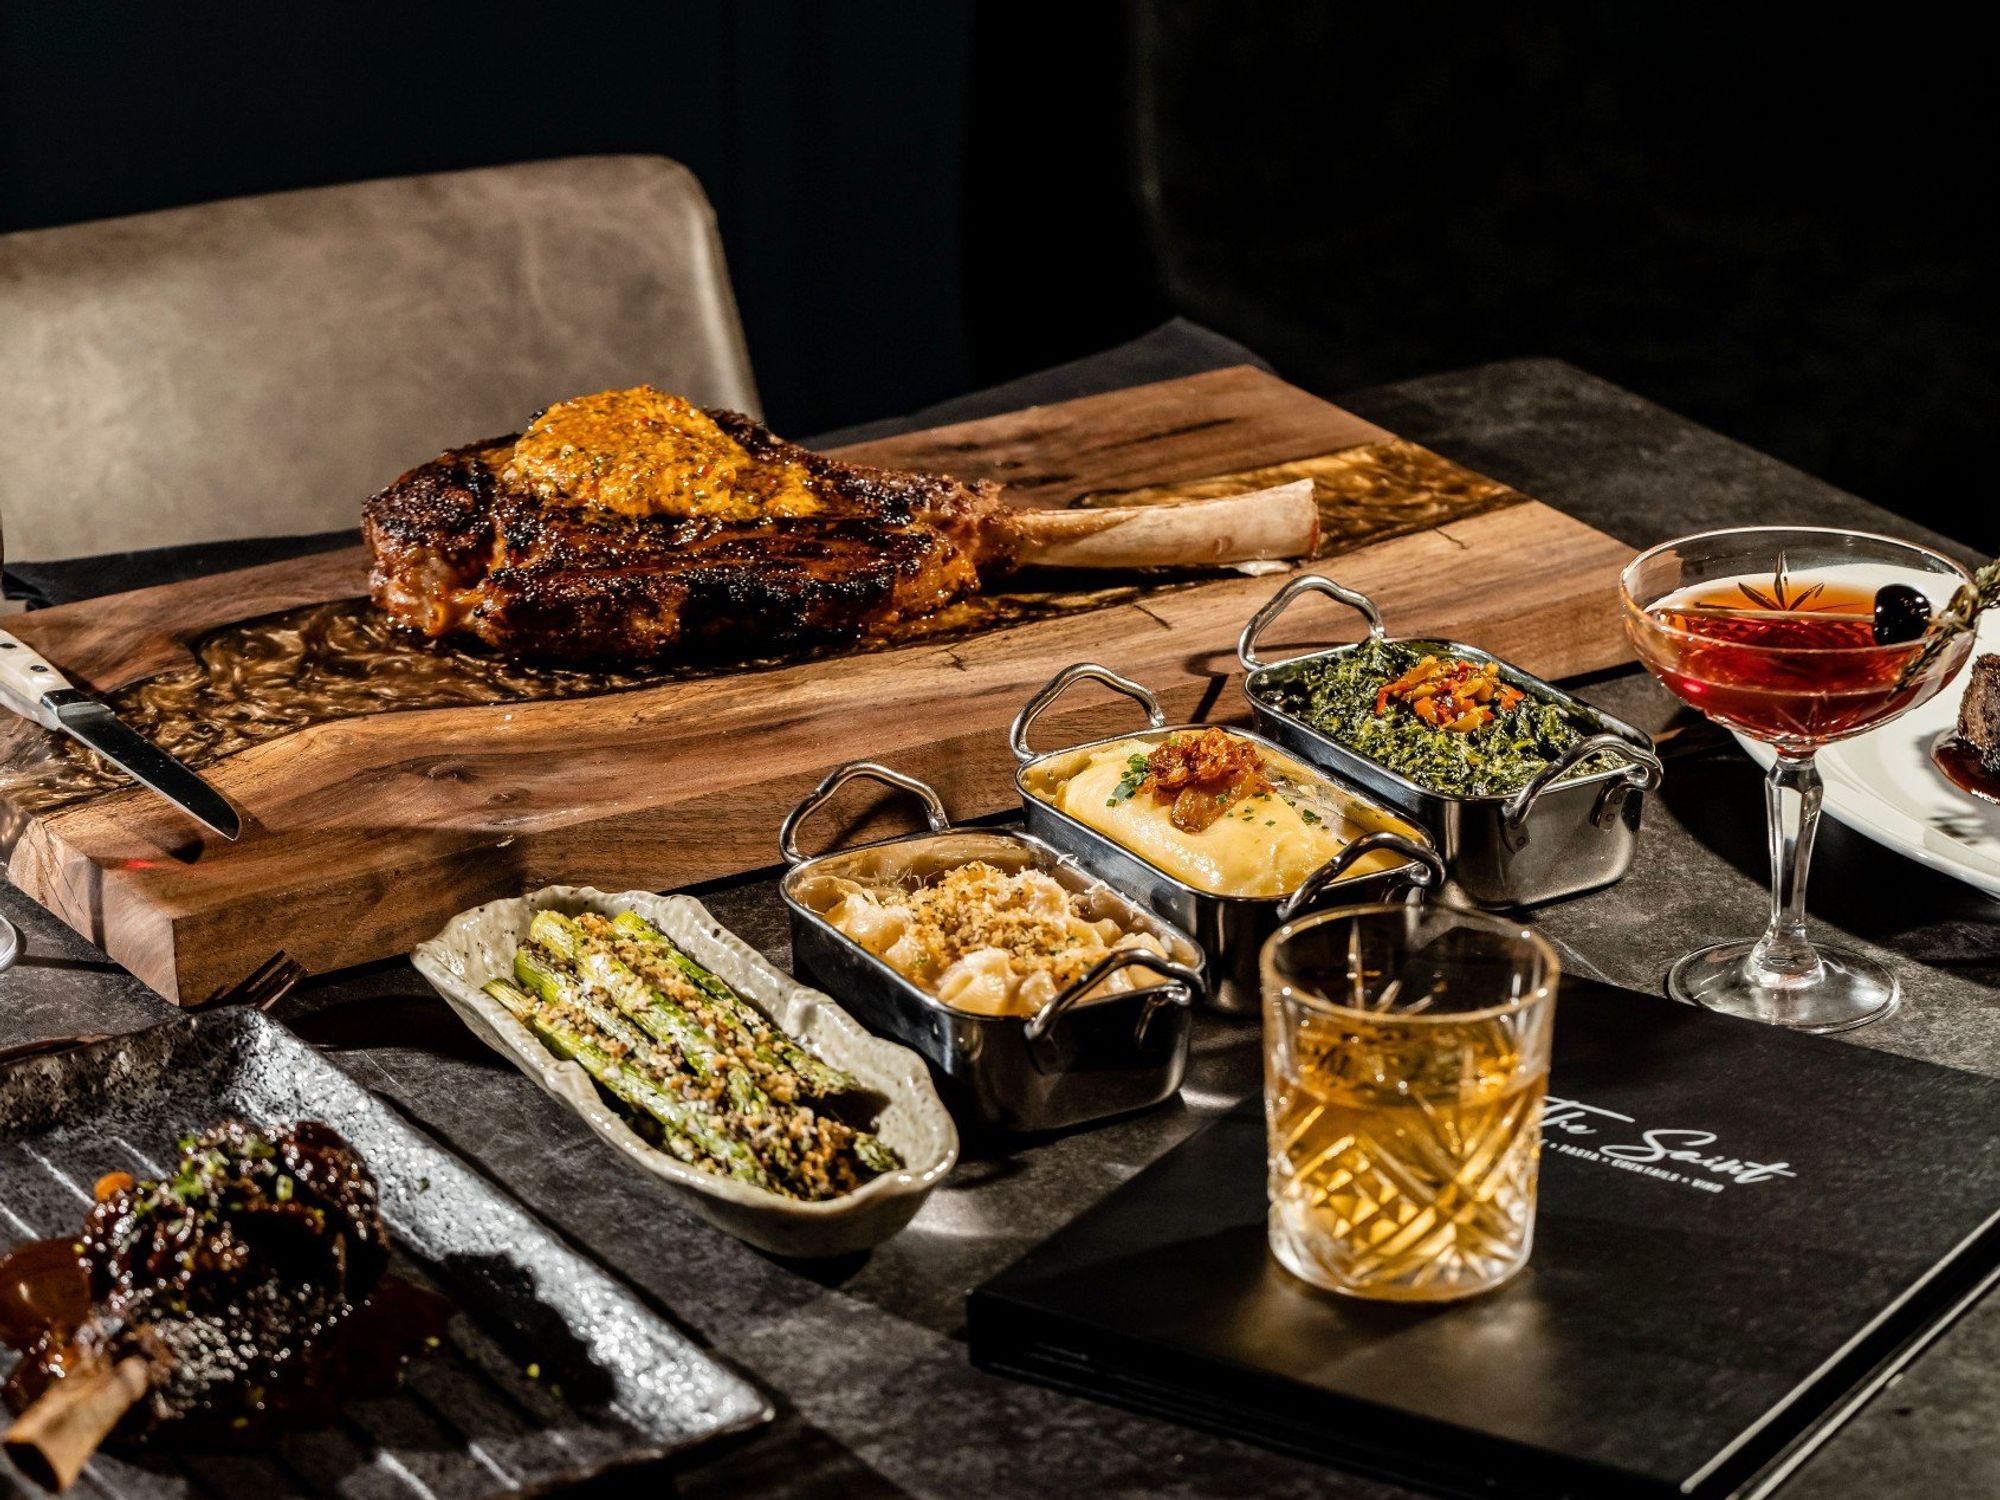 Steakhouse from Las Vegas group makes sizzling Dallas debut near